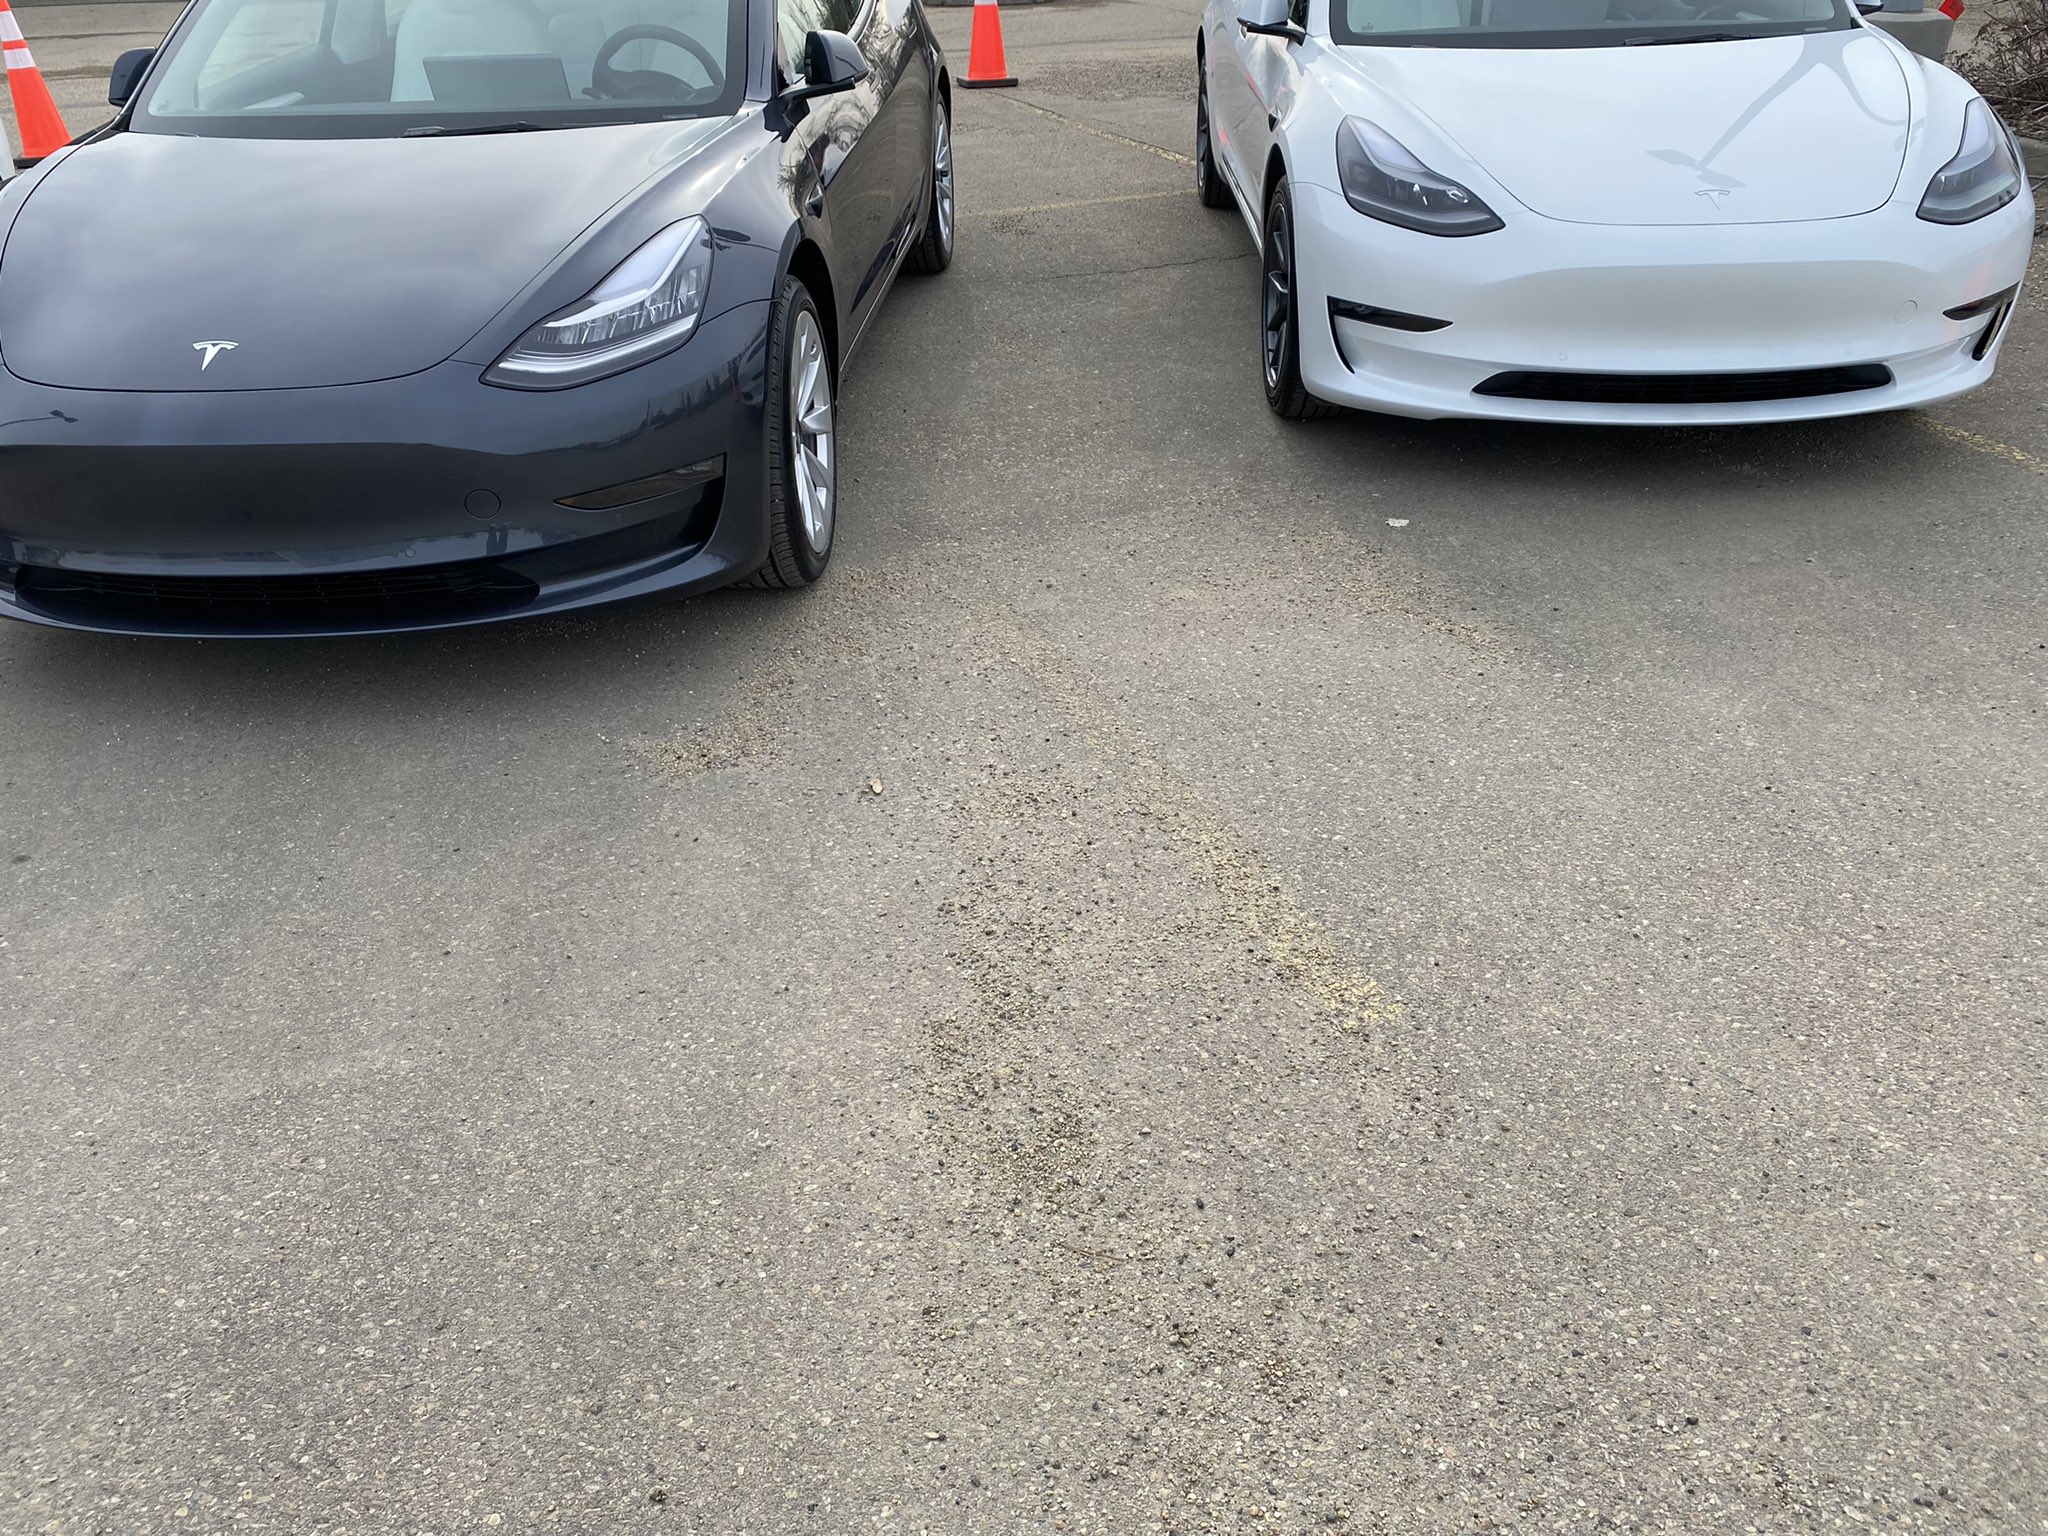 Tesla appears have reverted to using LED headlights in Model 3 builds - Drive Tesla